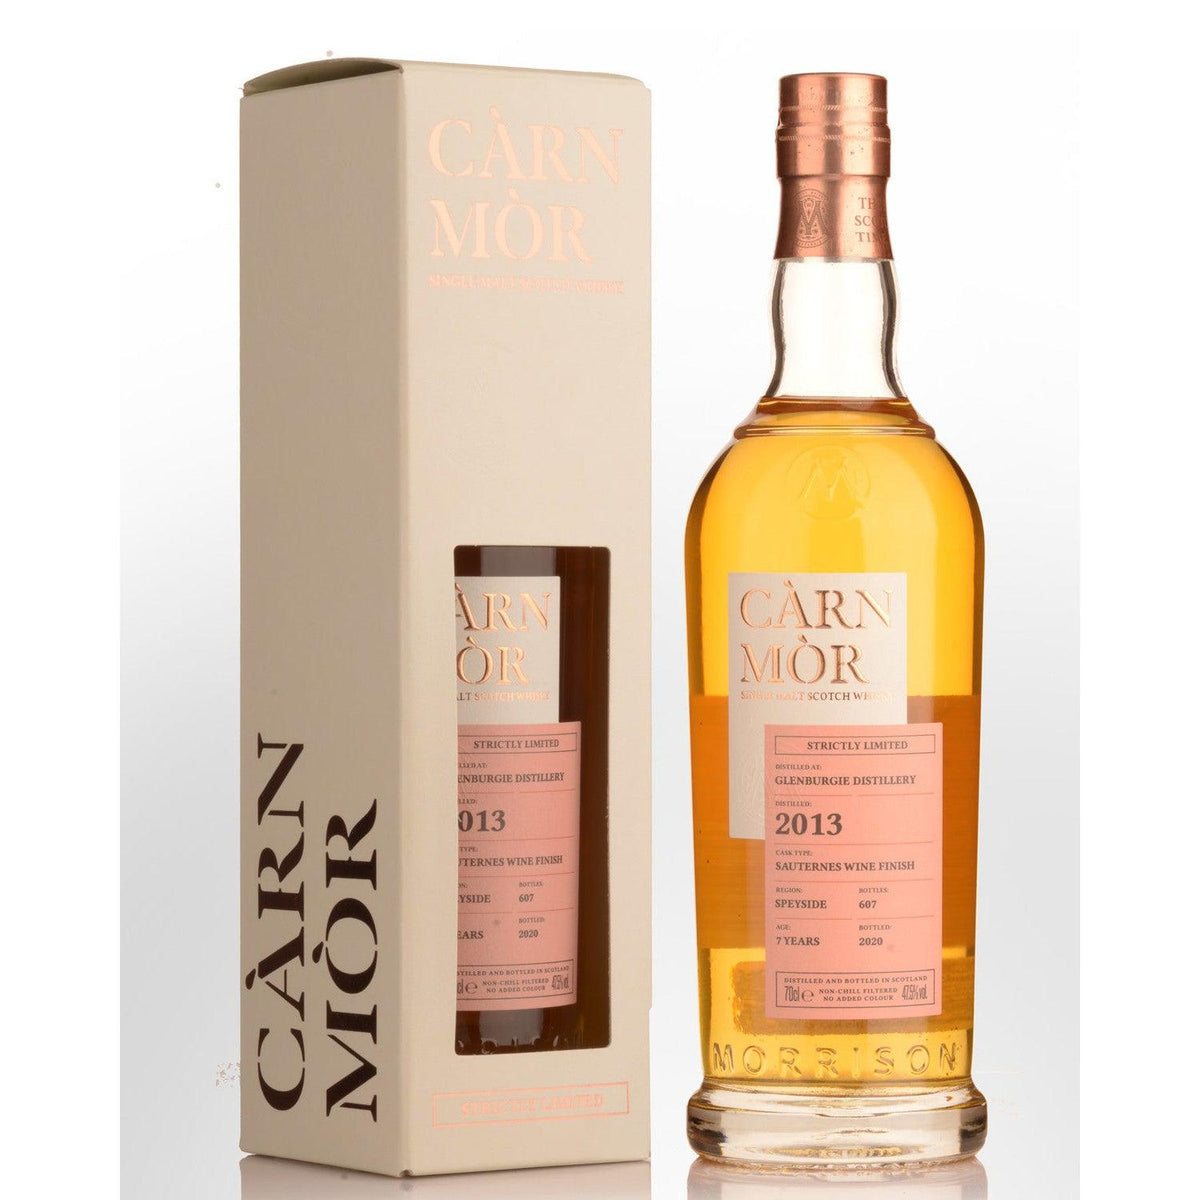 Glenburgie 7 Year Old 2013 Carn Mor Strictly Limited Whisky 700ml